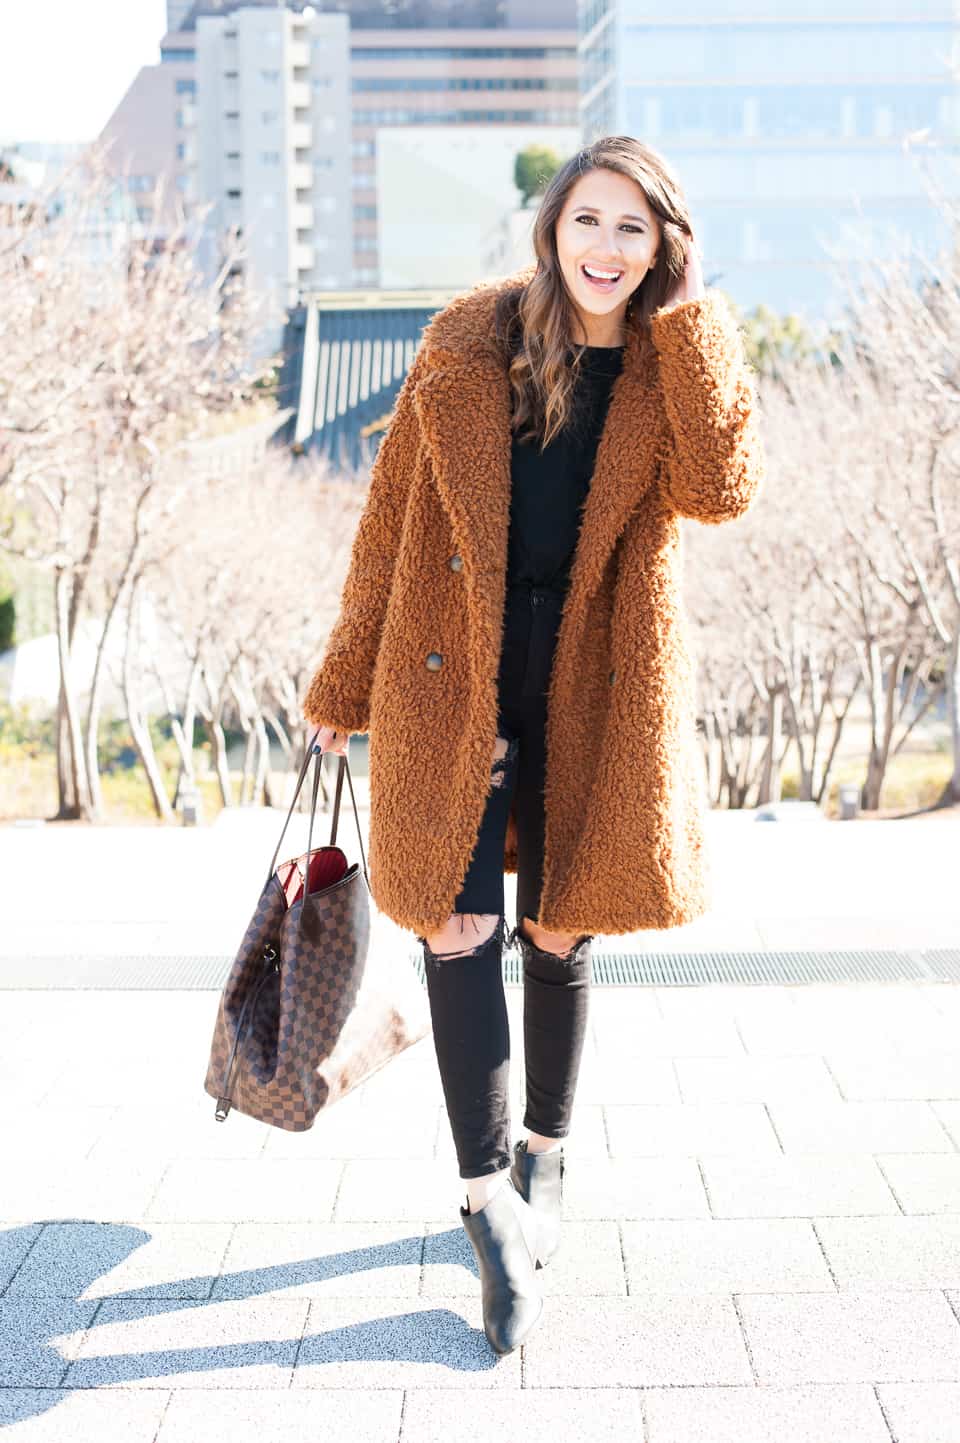 Dress Up Buttercup // A Houston-based fashion travel blog developed to daily inspire your own personal style by Dede Raad | Teddy Bear Coat